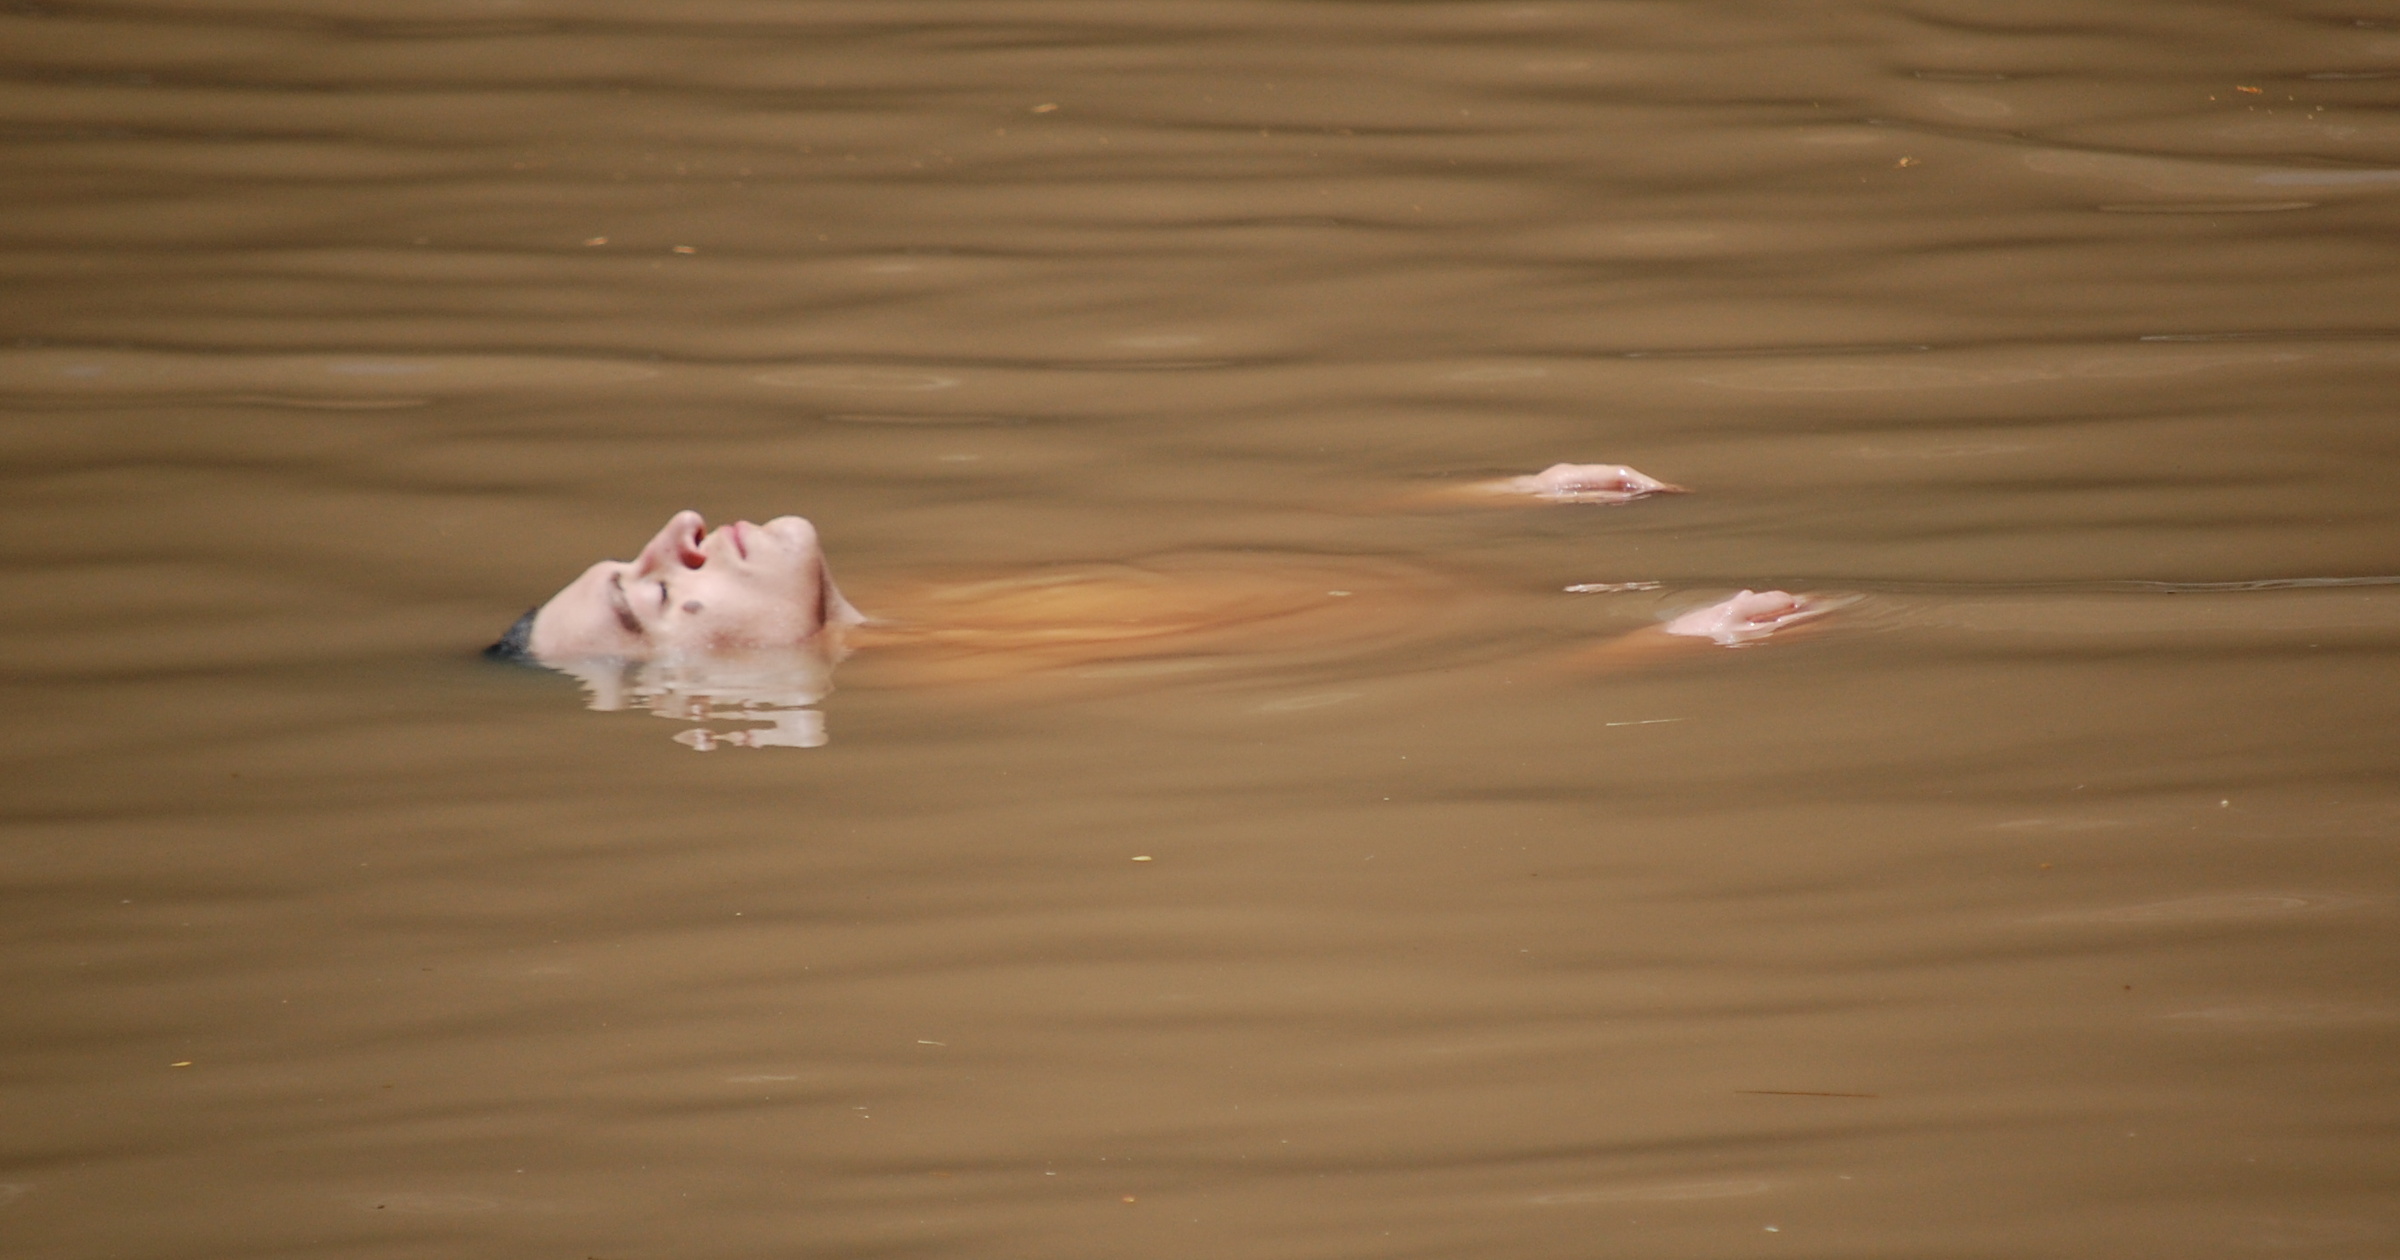 an photo of me floating in muddy water, on the day of this story